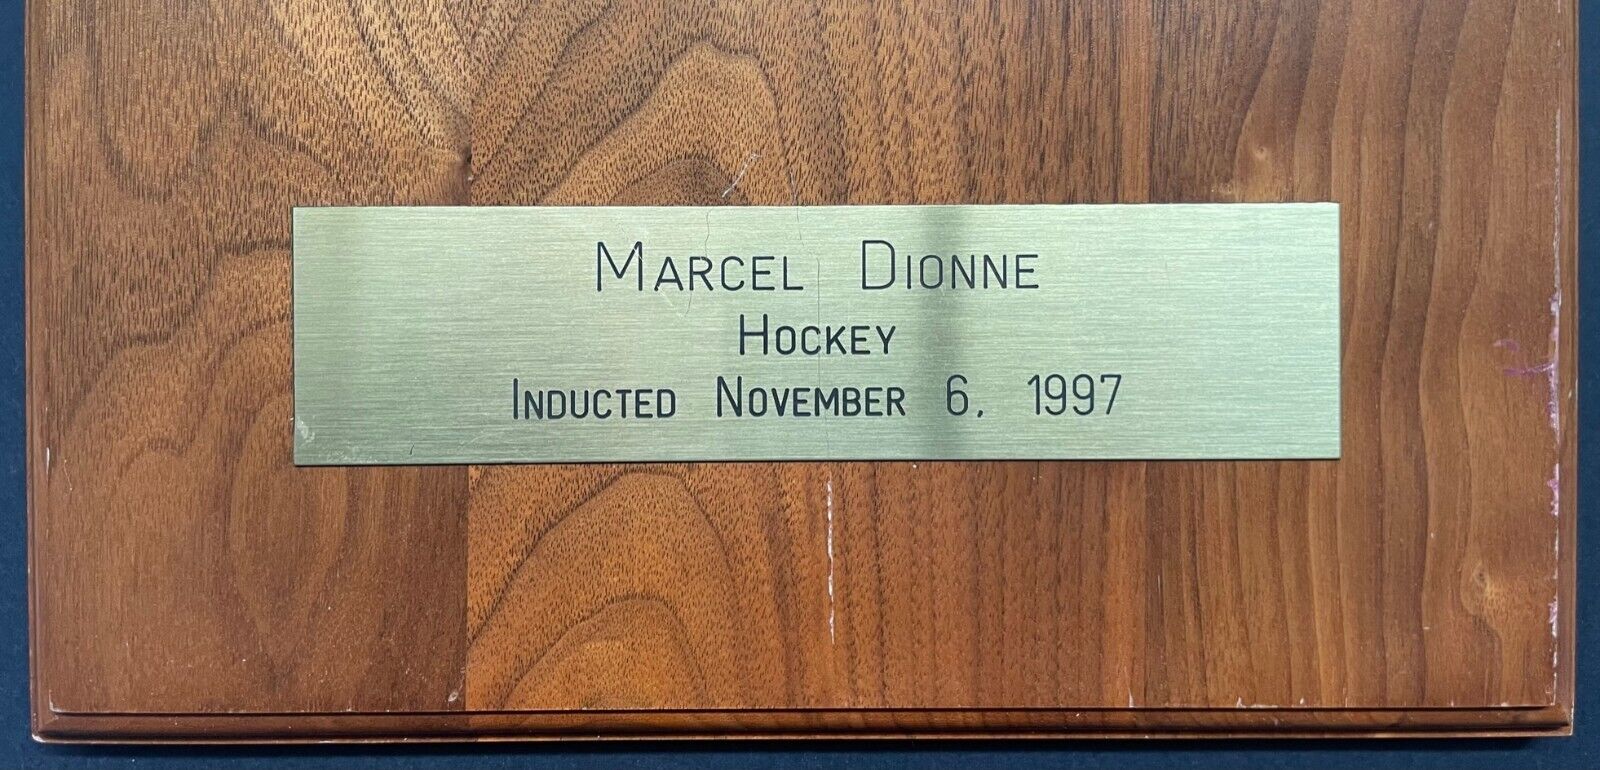 Not in Hall of Fame - Marcel Dionne